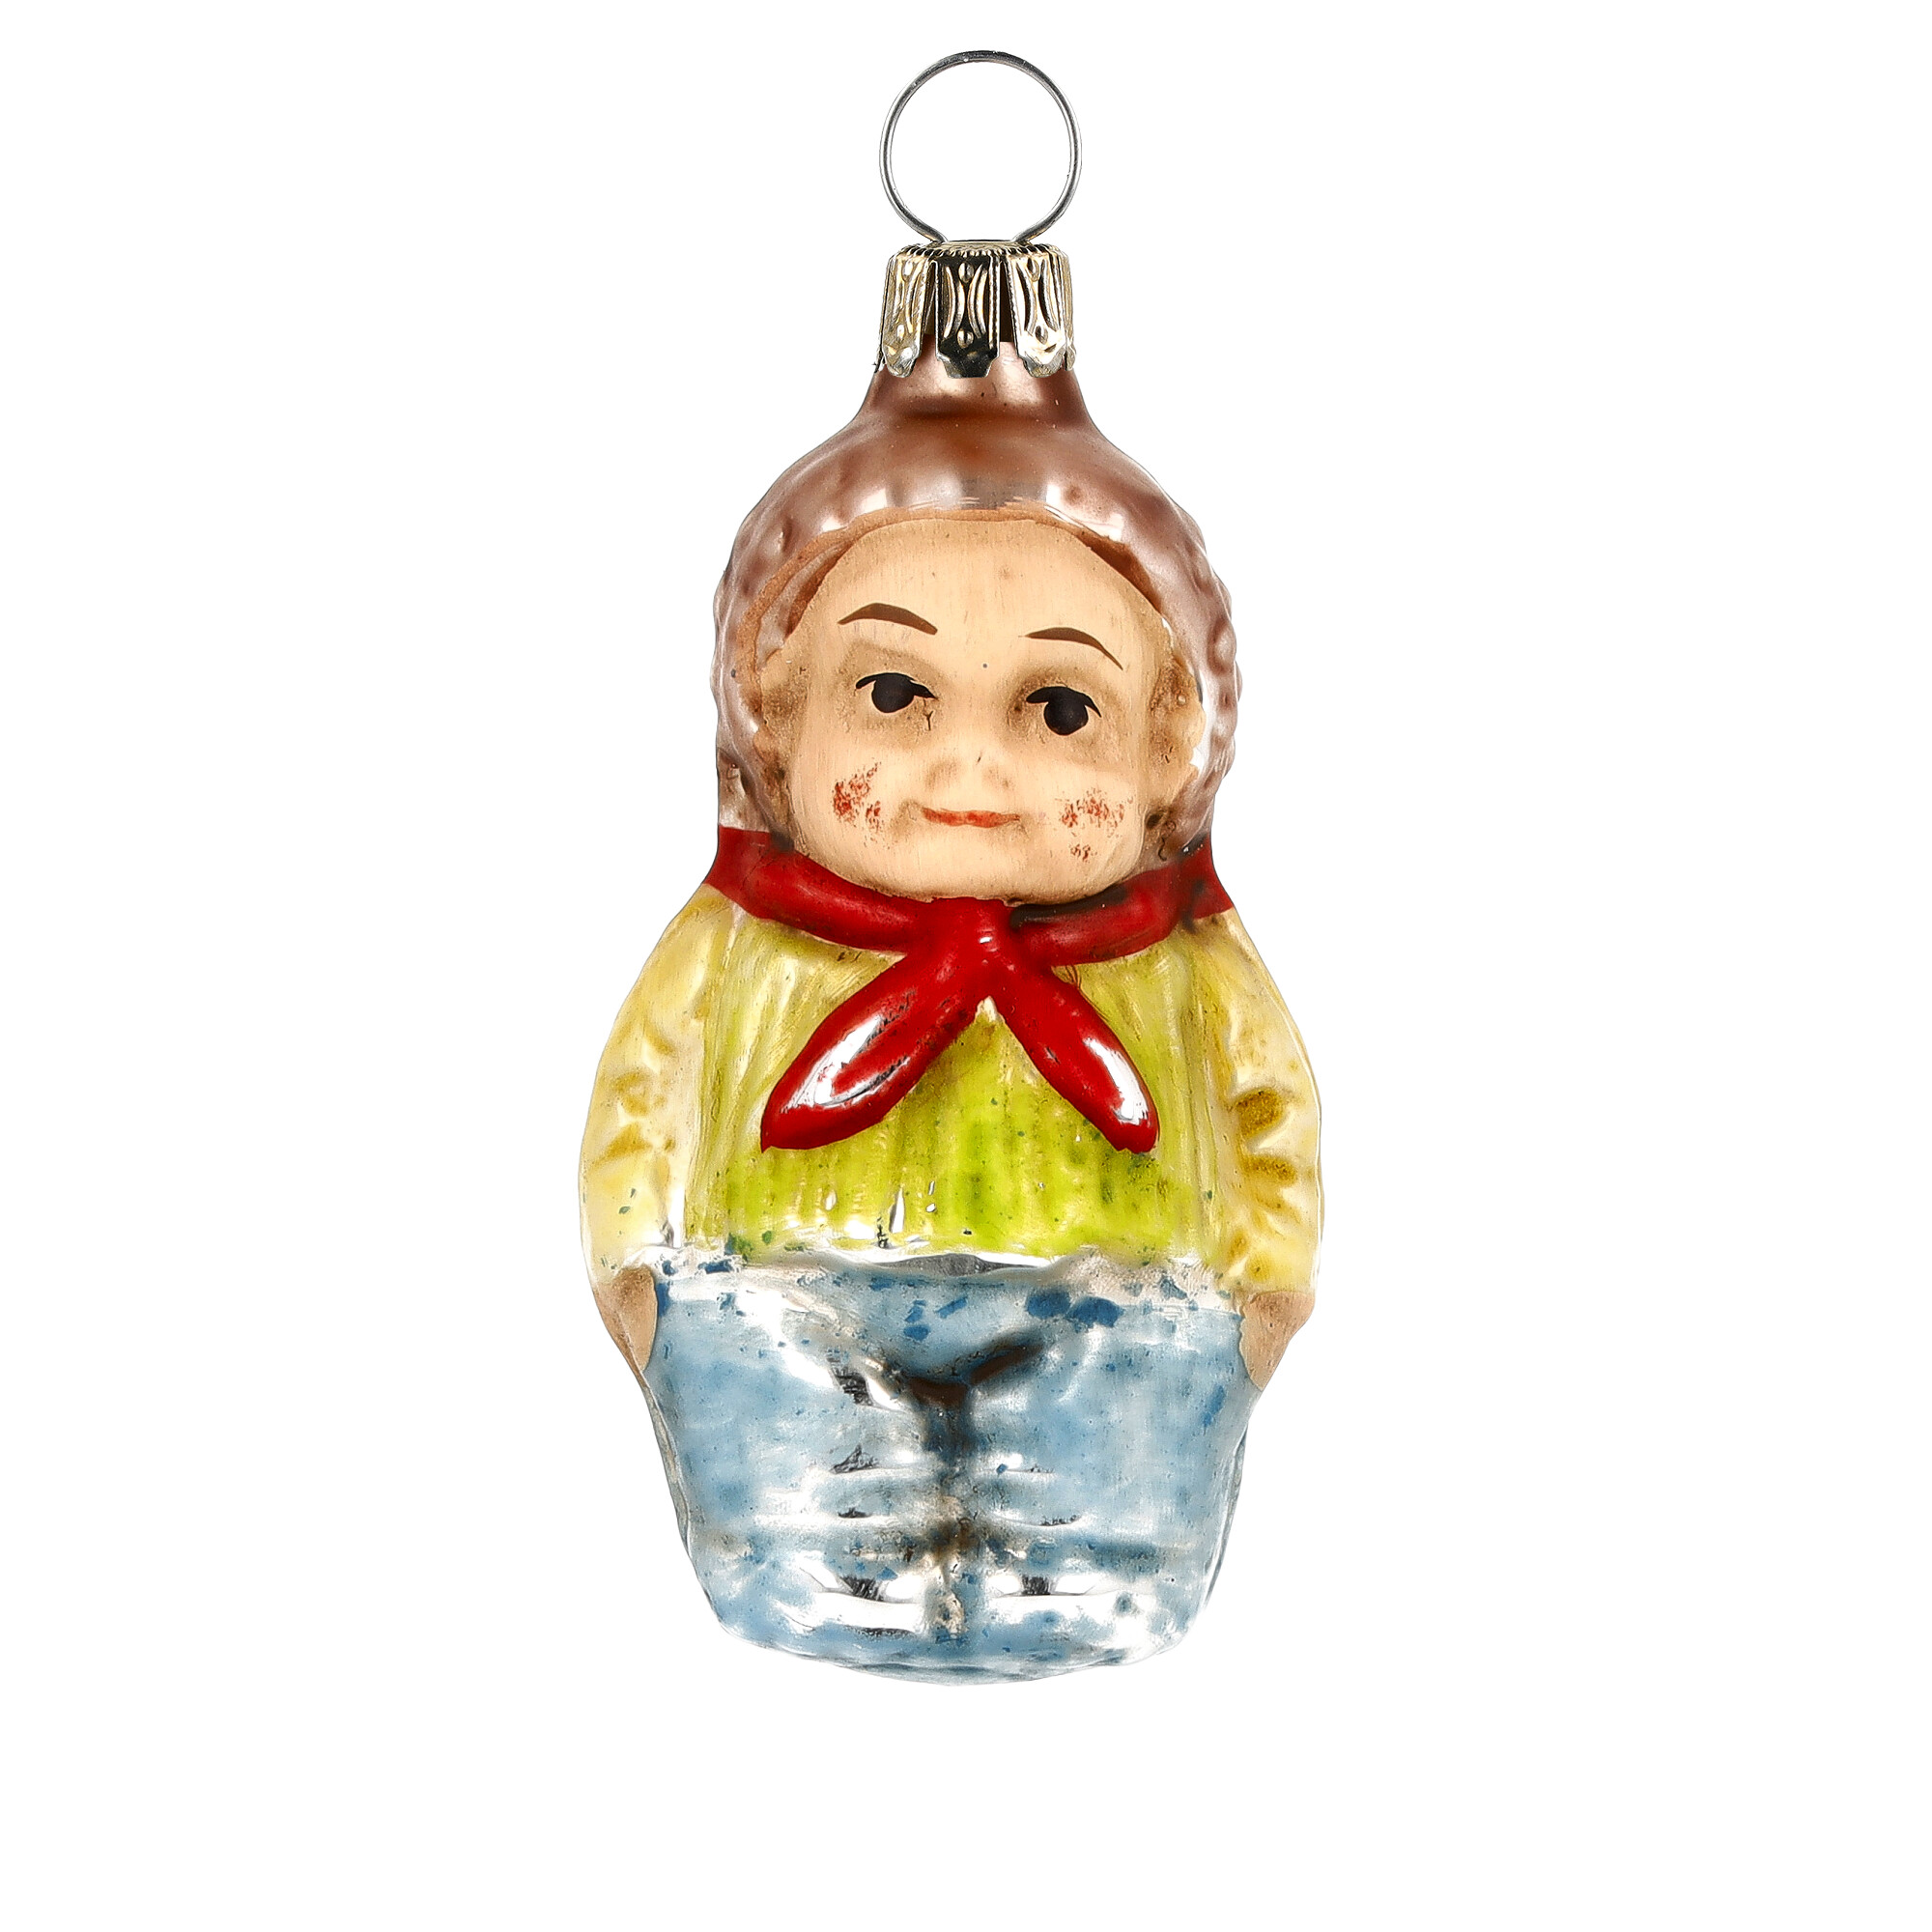 Retro Vintage style Christmas Glass Ornament - Boy with cap